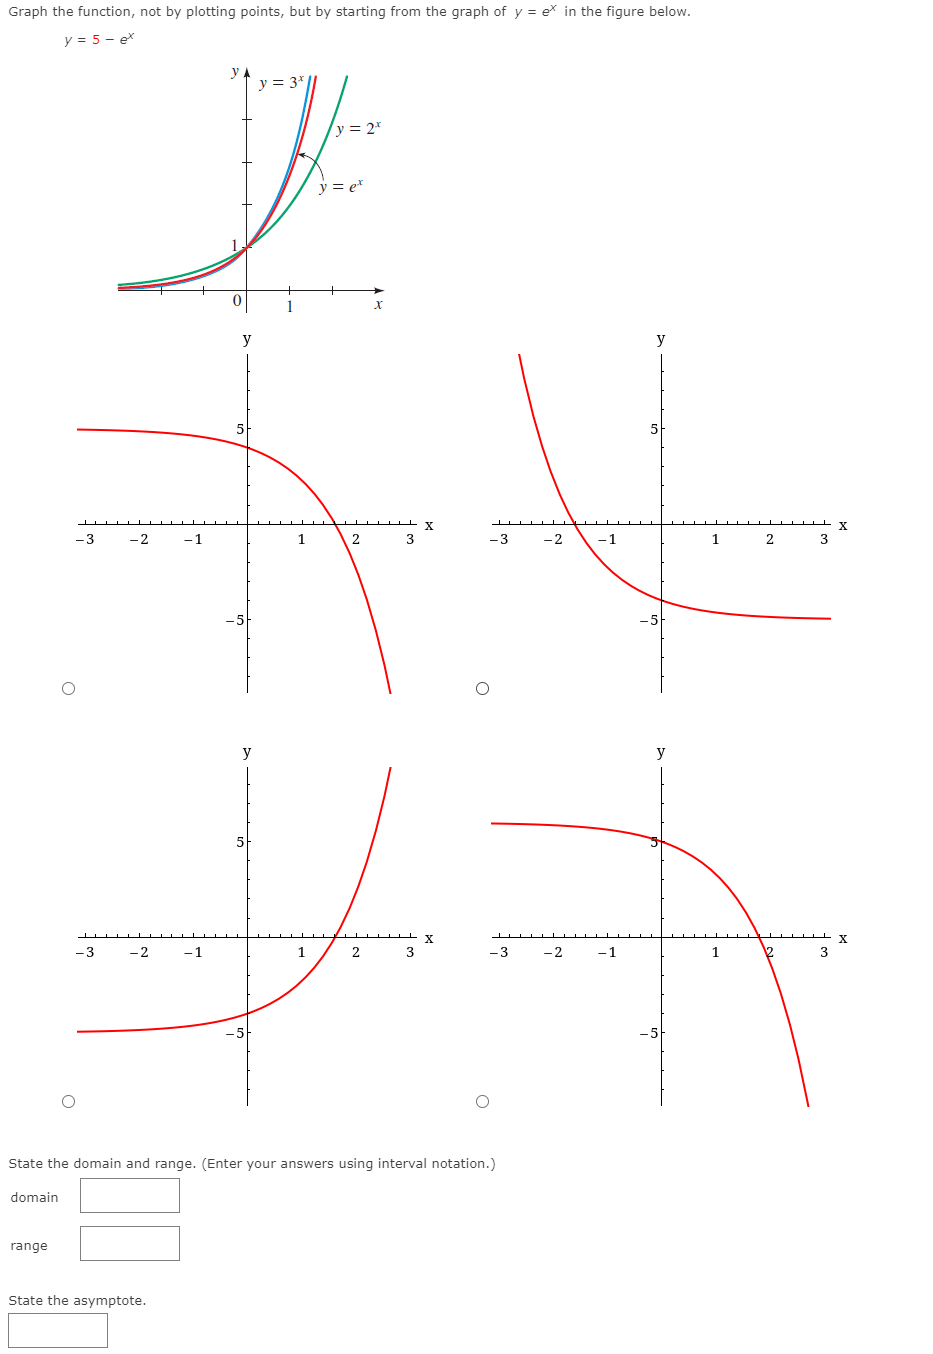 Graph the function, not by plotting points, but by starting from the graph of y = ex in the figure below.
y = 5 - ex
у
y = 3*
y = 2*
y = e*
y
y
5
X
X.
-3
-2
-1
1
3
-3
-2
-1
2
y
y
-3
-2
-1
2
3
-3
-2
-1
1
2
3
State the domain and range. (Enter your answers using interval notation.)
domain
range
State the asymptote.
